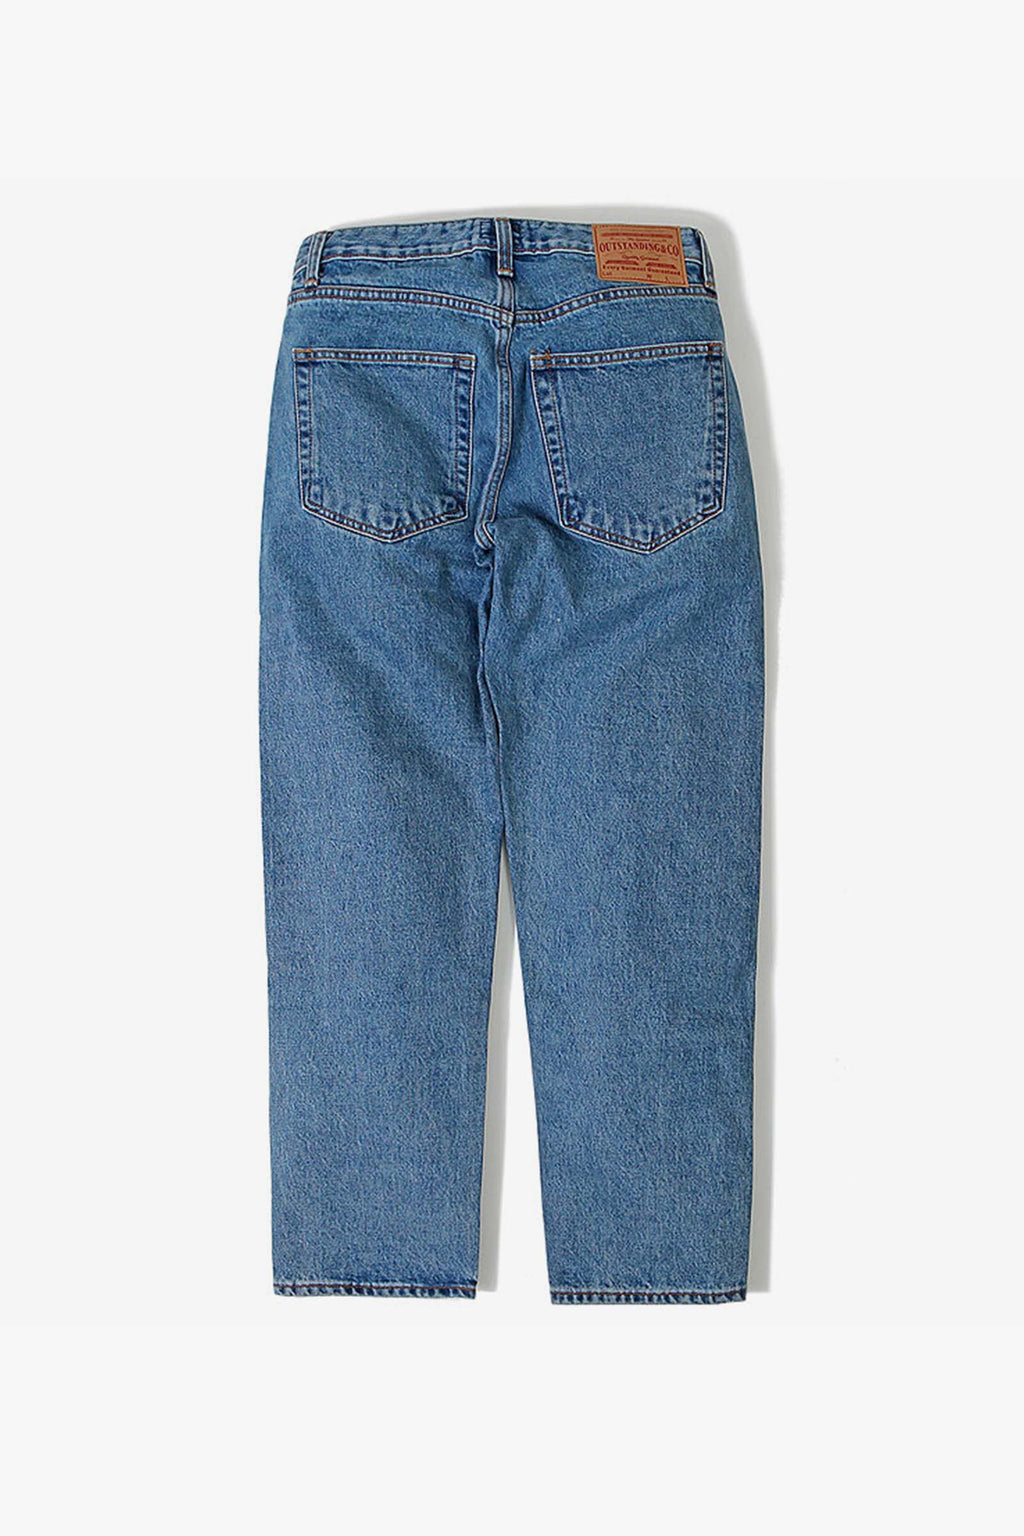 Outstanding & Co. - Tapered Washed Jeans - Light Blue